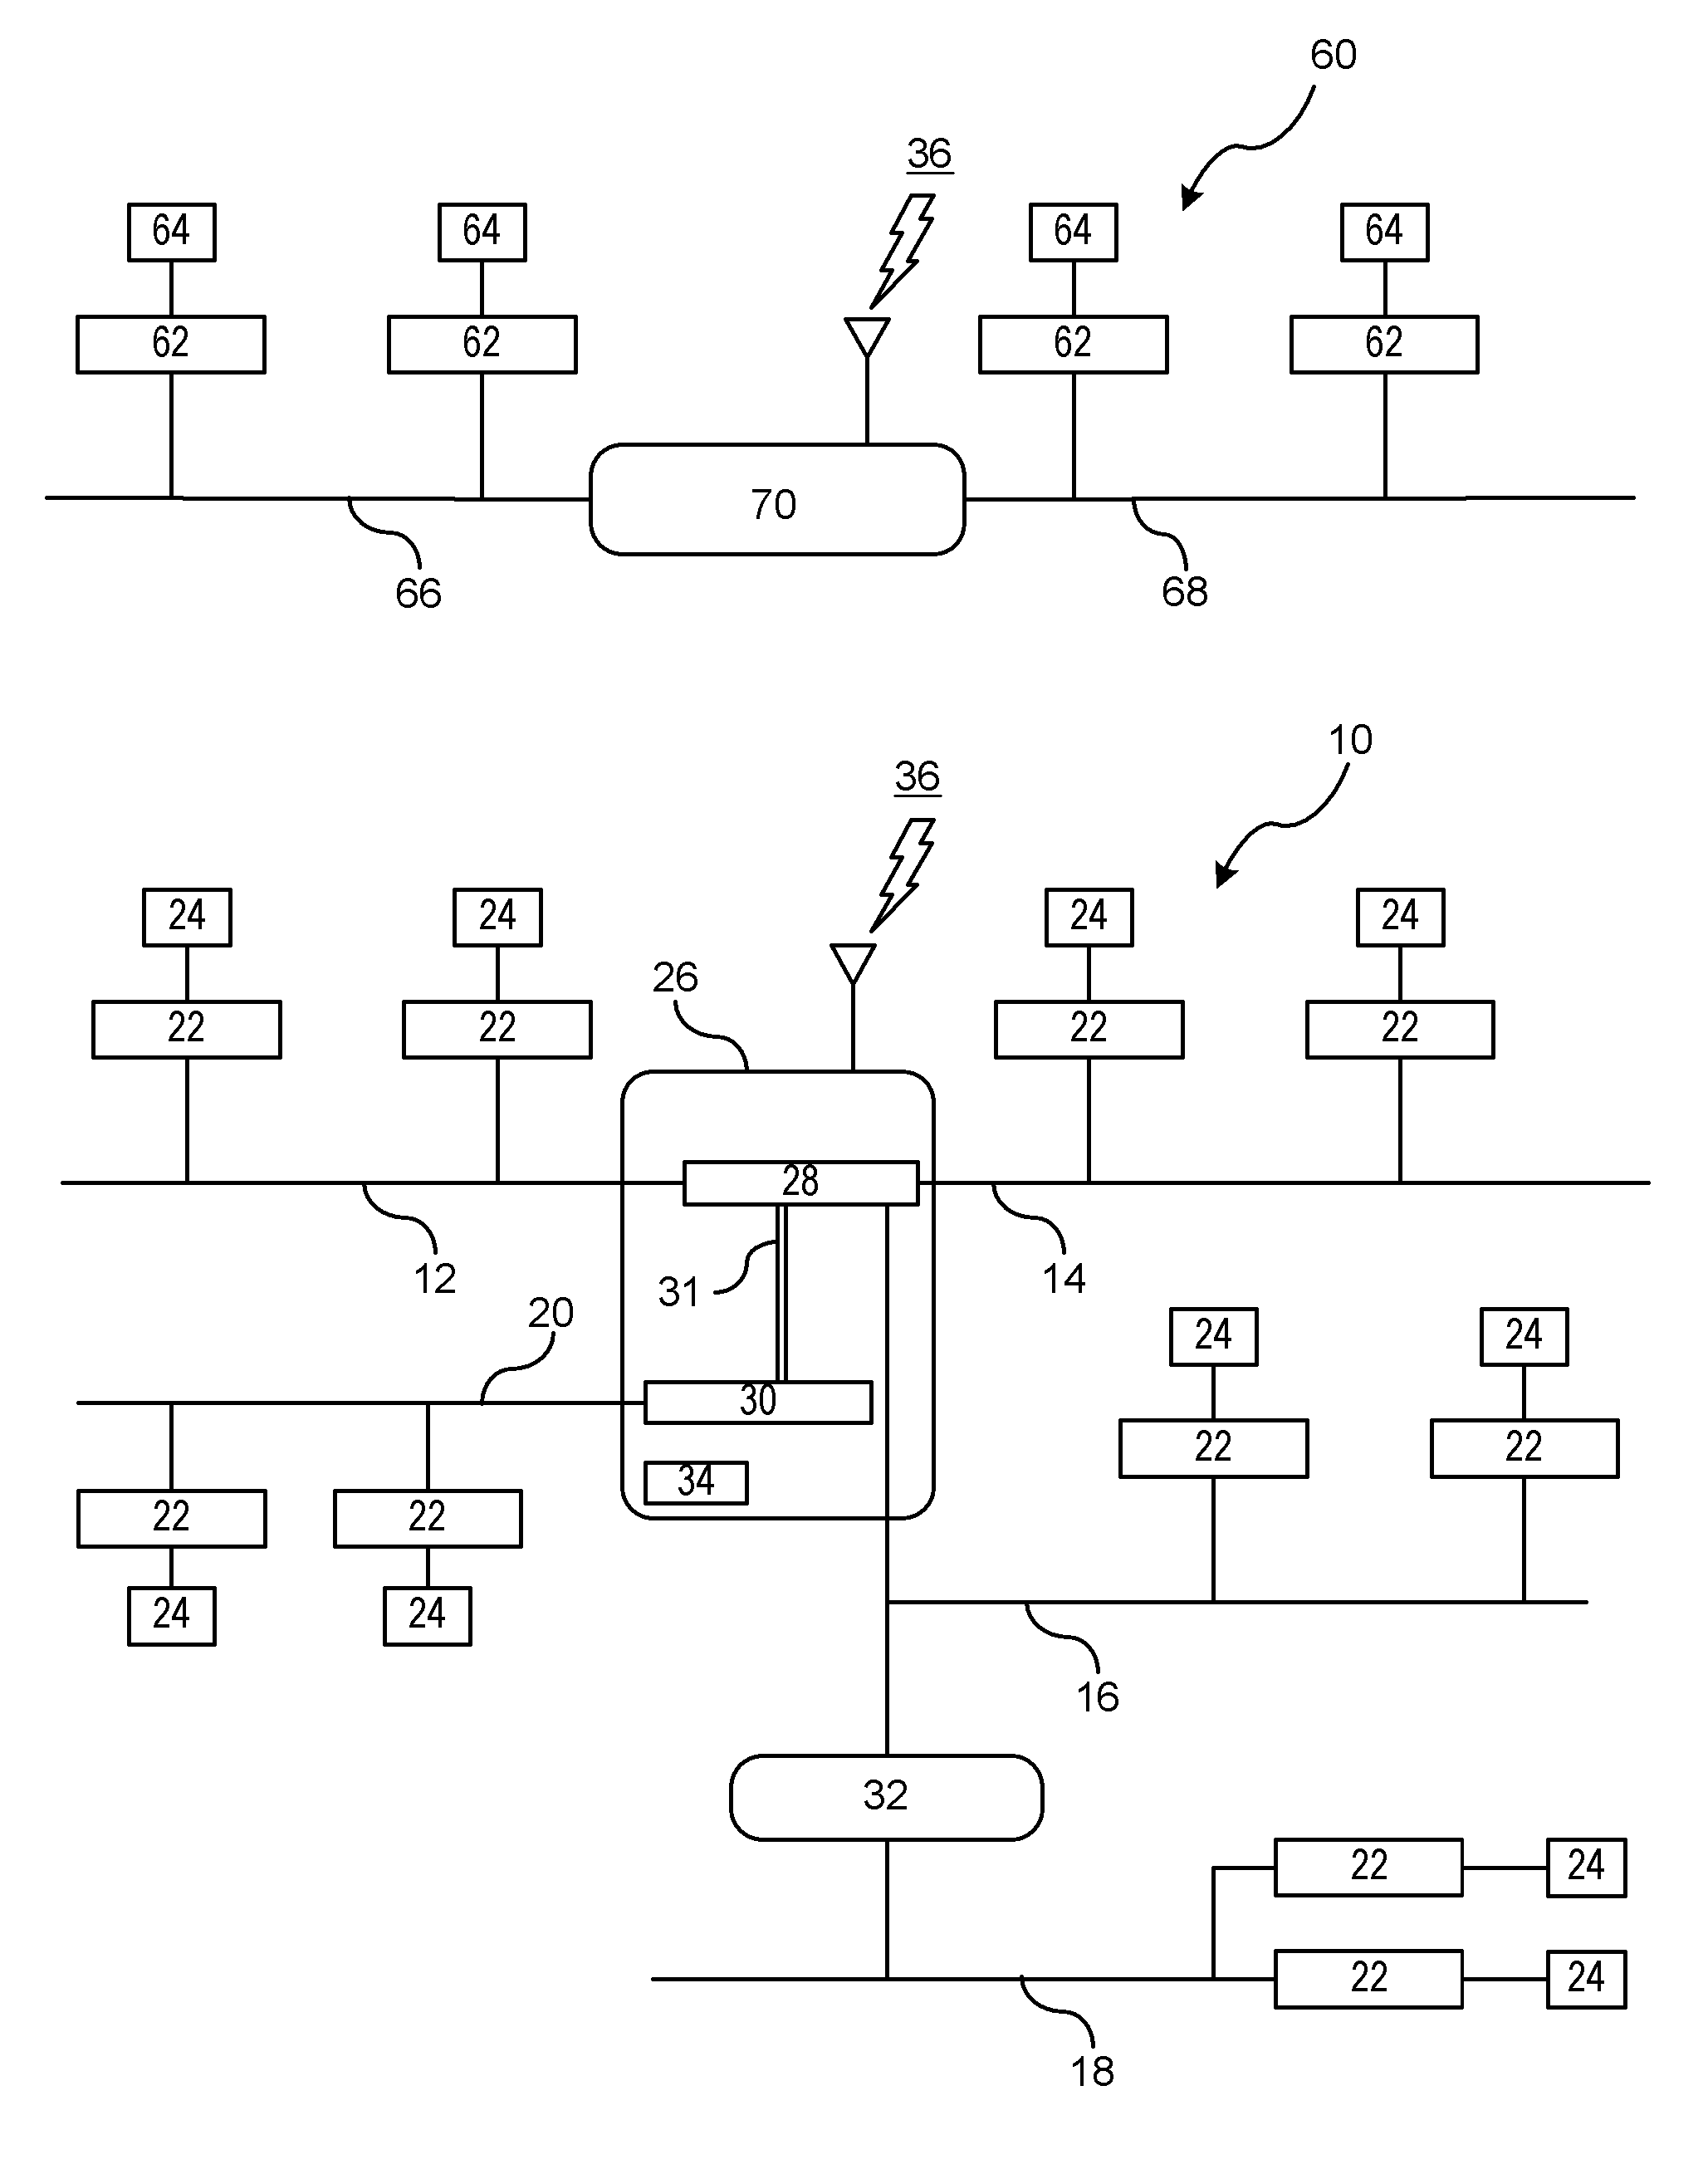 Data sensor coordination using time synchronization in a multi-bus controller area network system